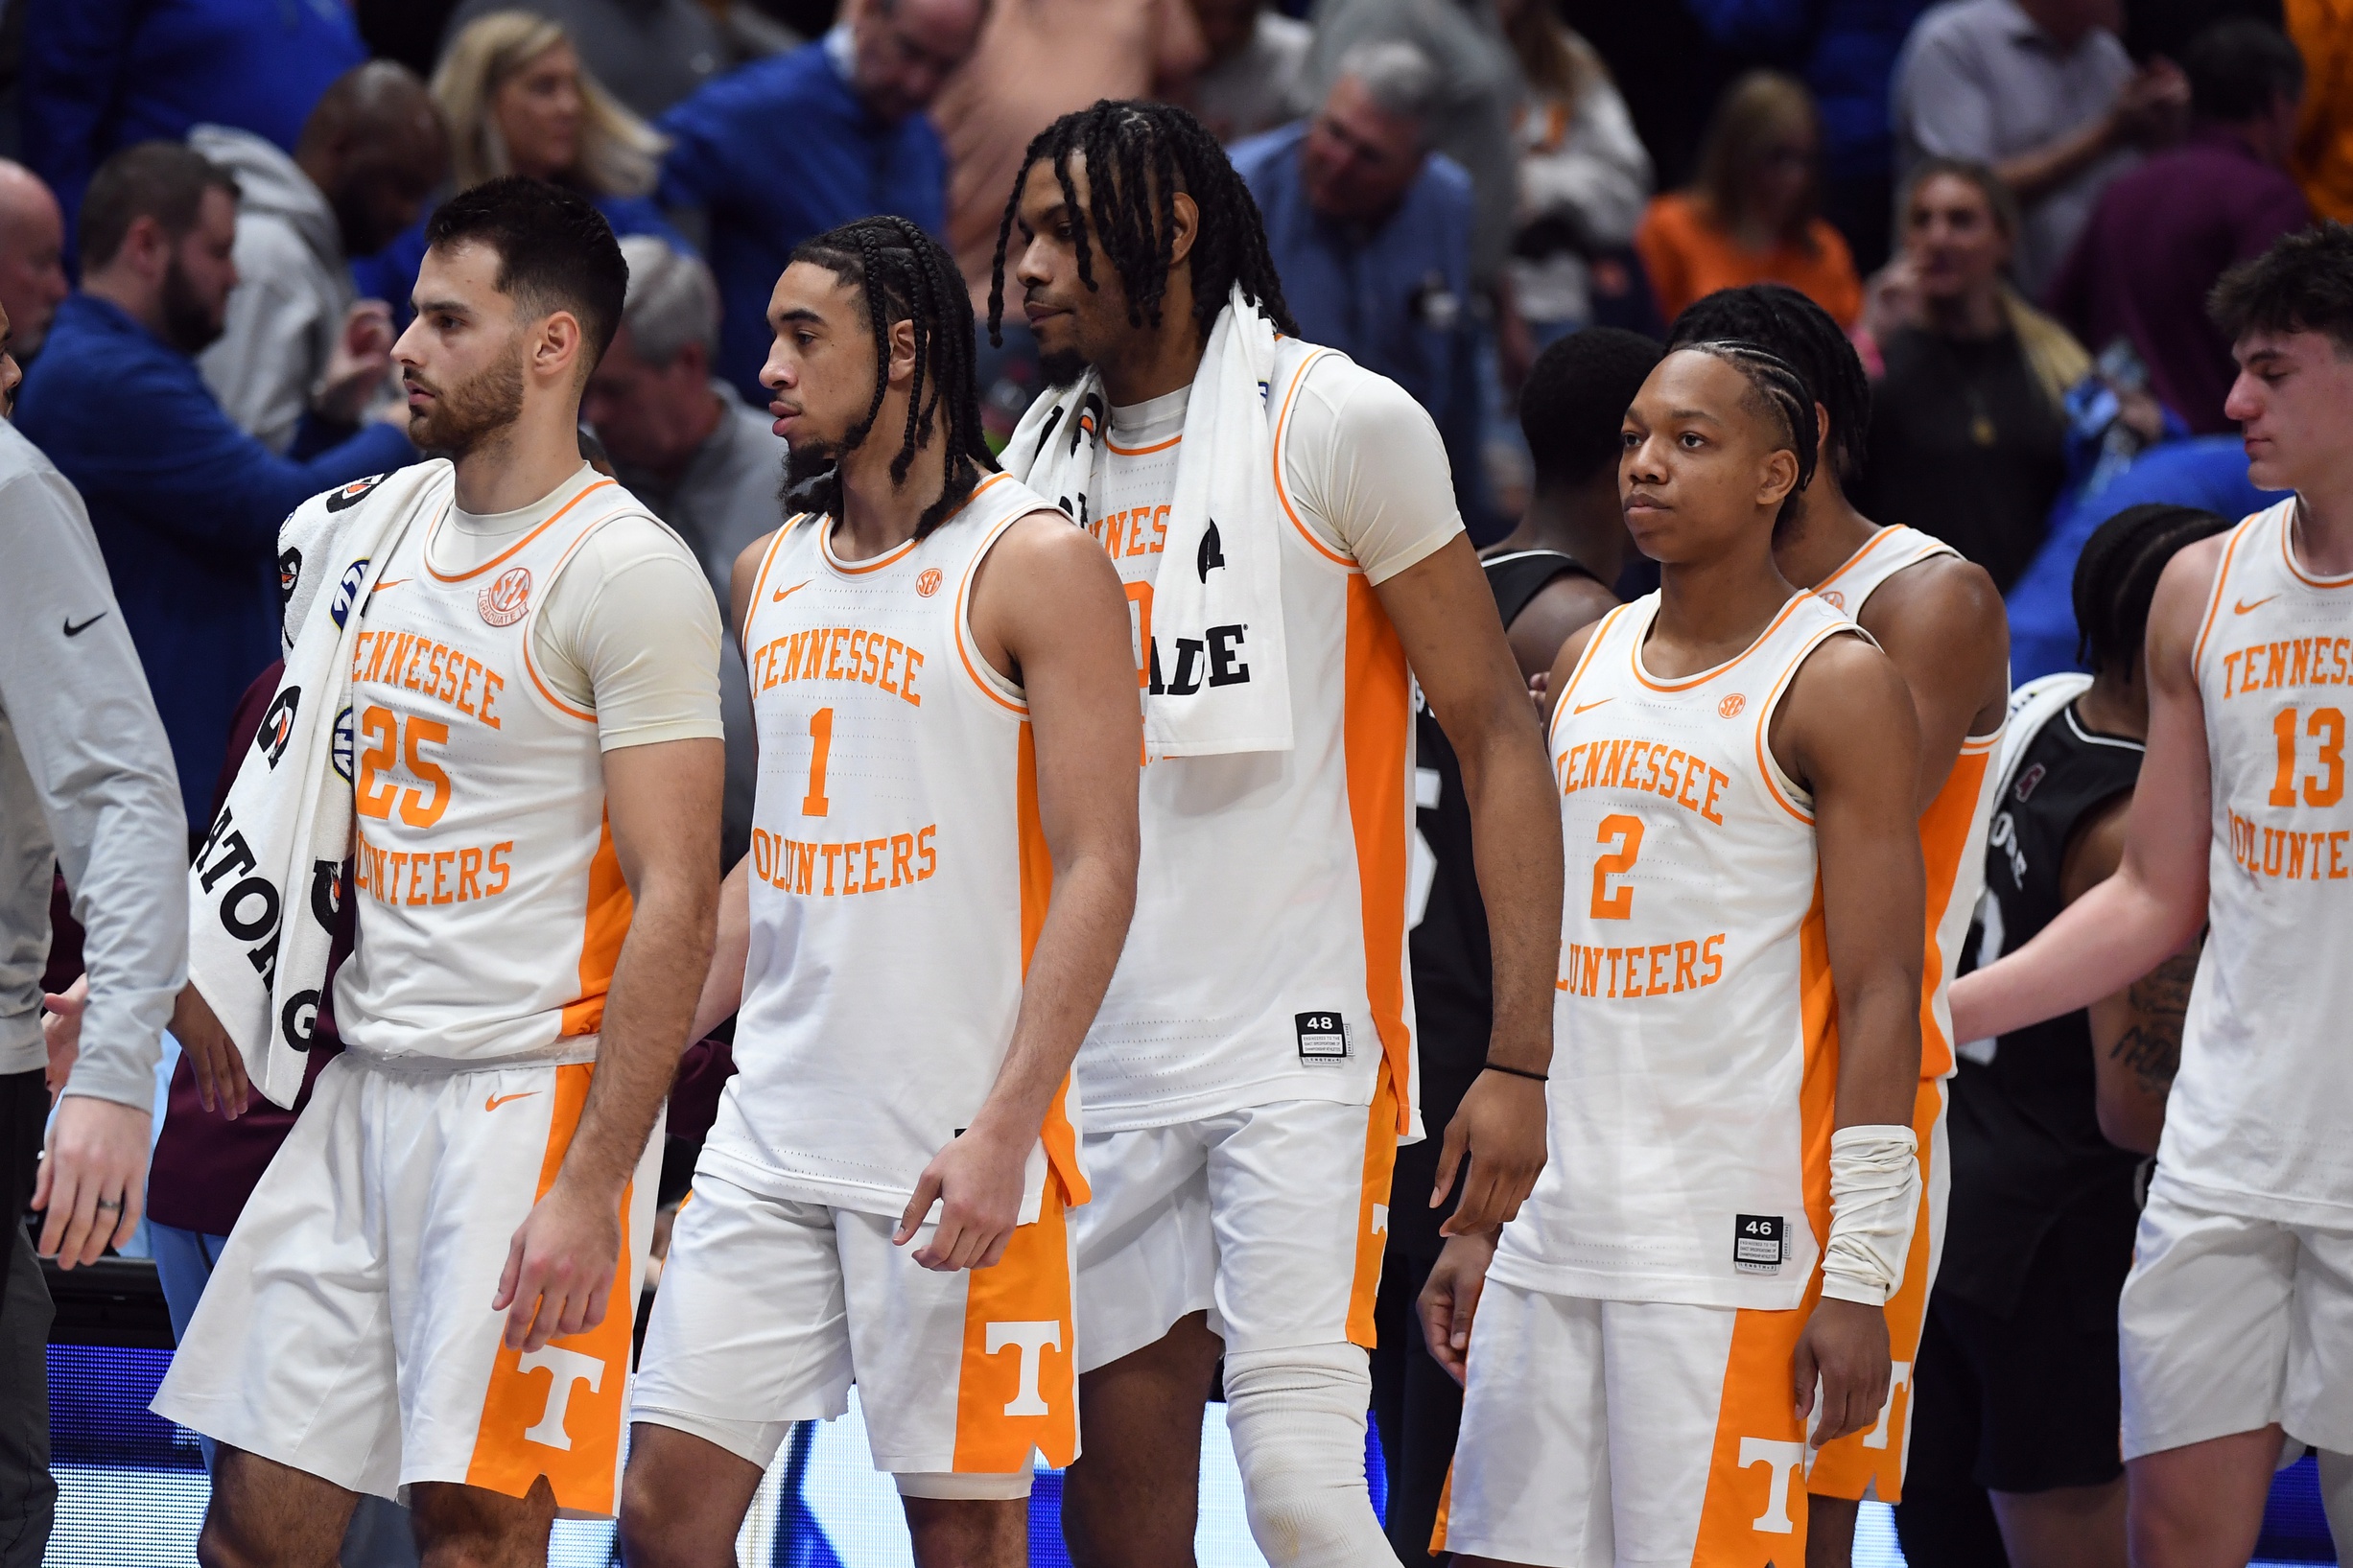 Mar 15, 2024; Nashville, TN, USA; Tennessee Volunteers players walk the handshake line after a loss against the Mississippi State Bulldogs at Bridgestone Arena.